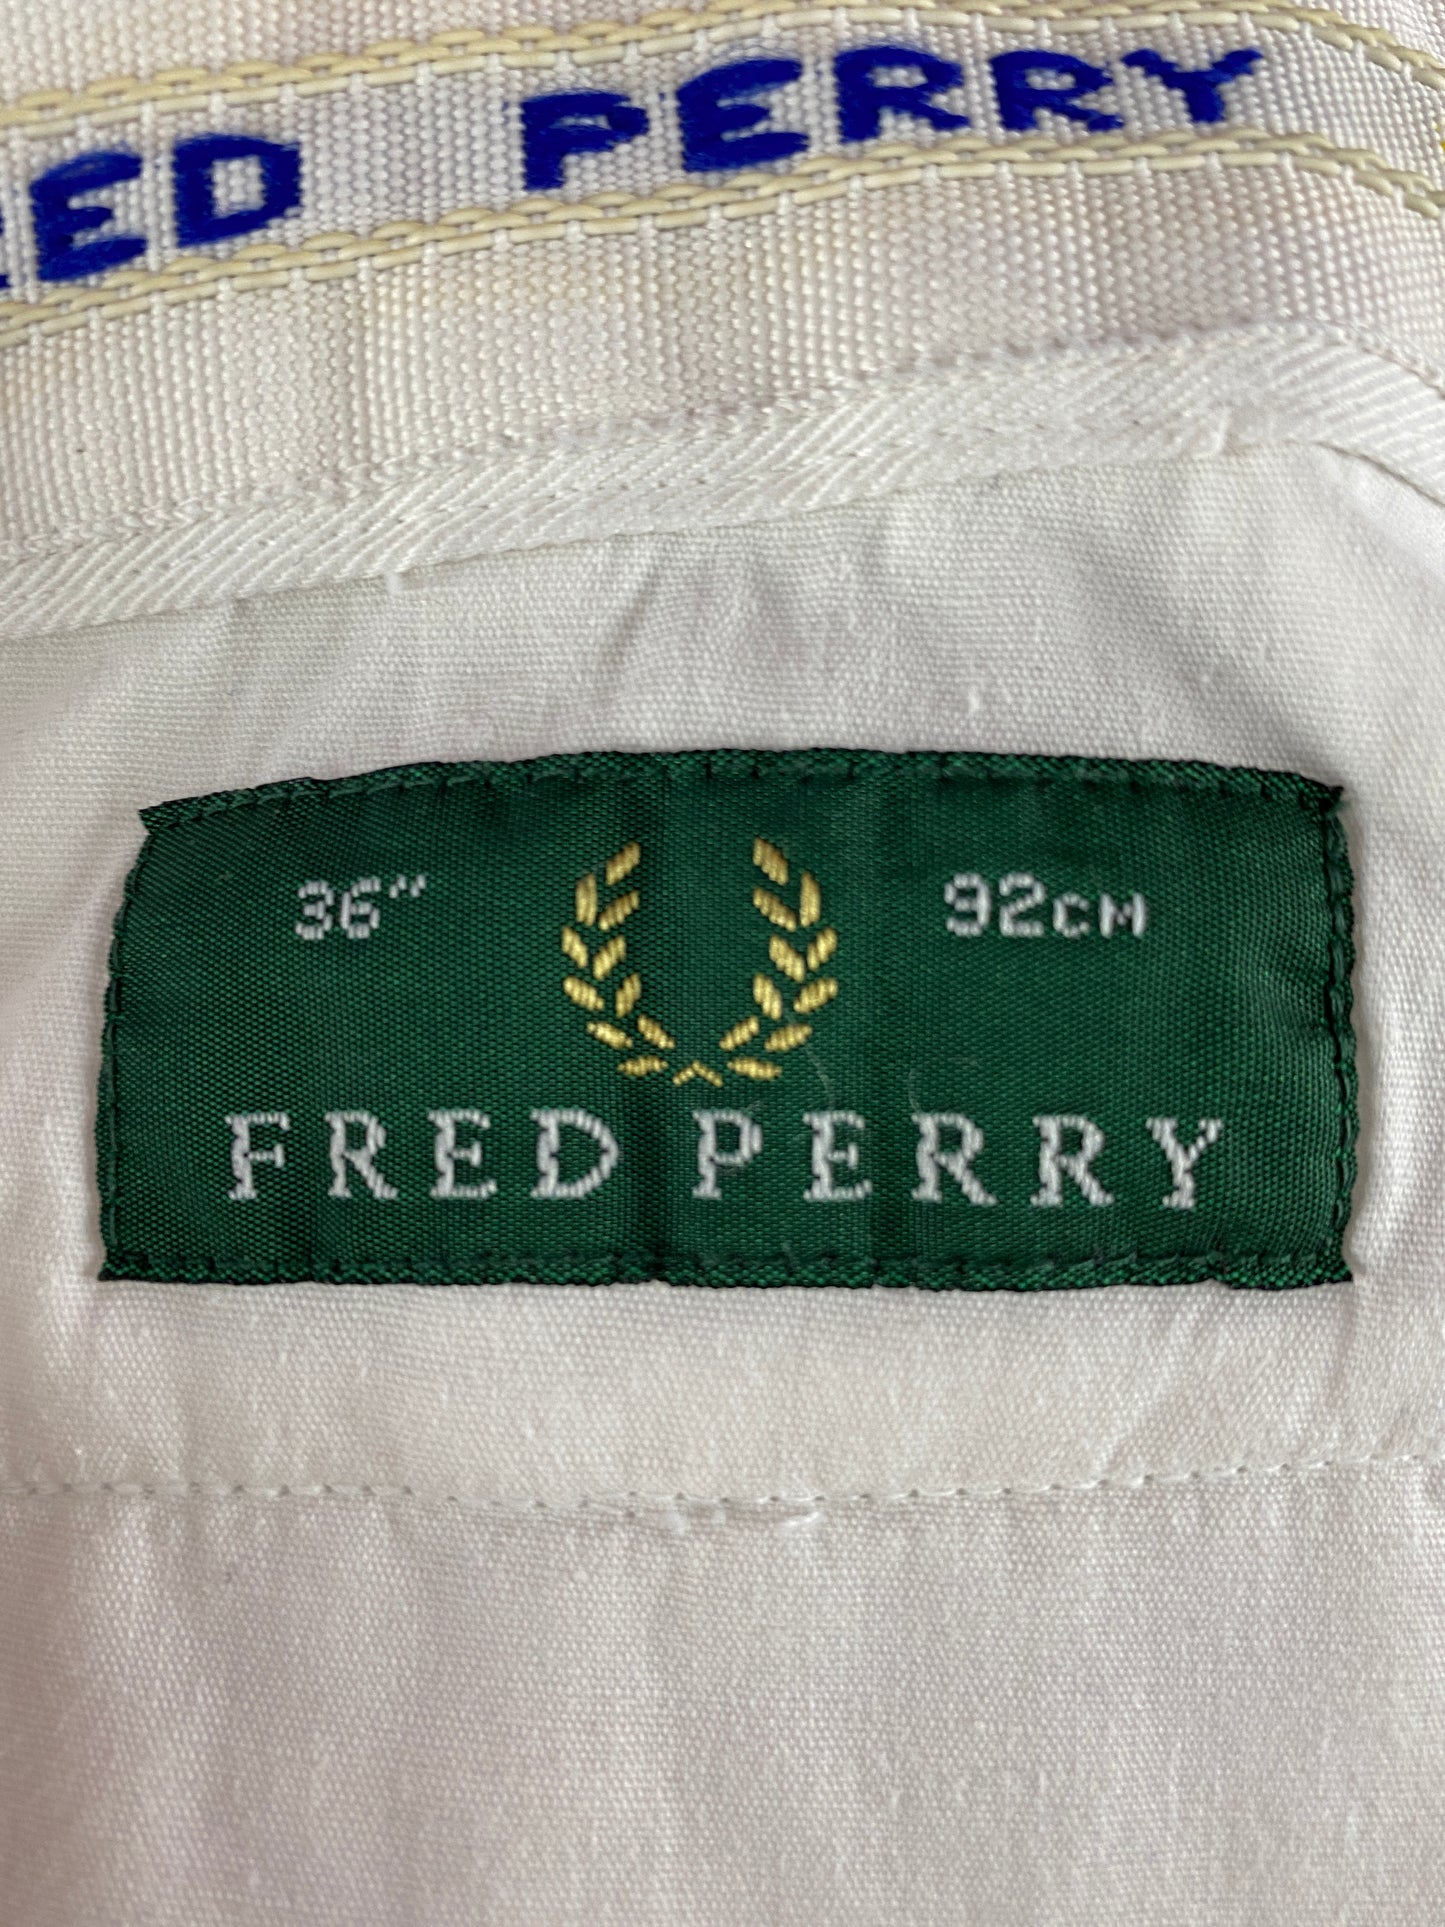 90s Fred Perry Vintage Men's Tennis Shorts - 36 White Polyester Blend